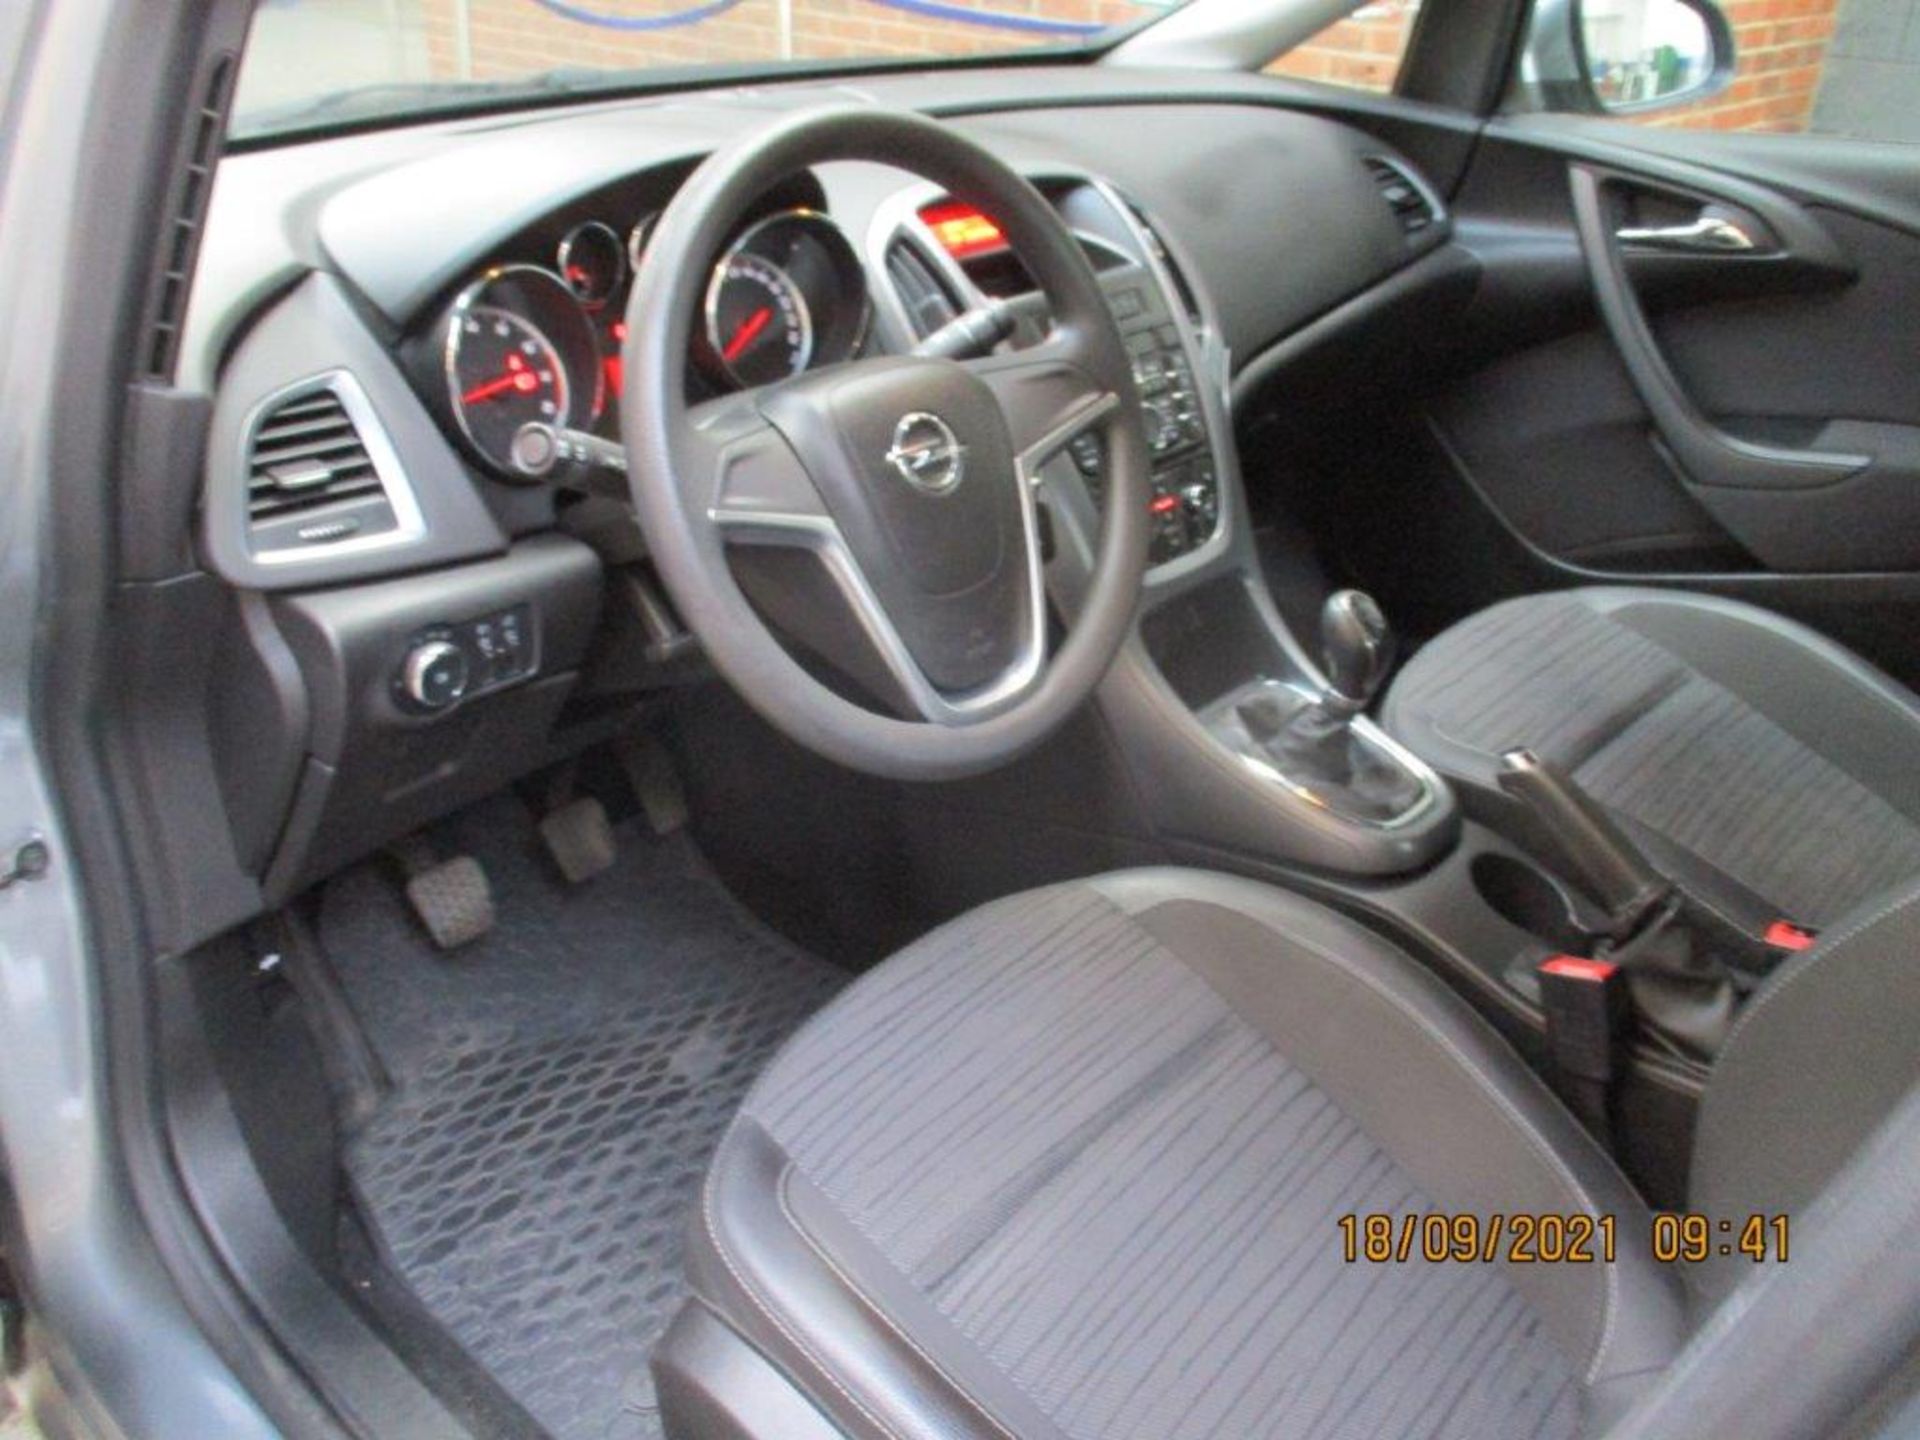 15 15 Opel Astra LHD - Image 10 of 20